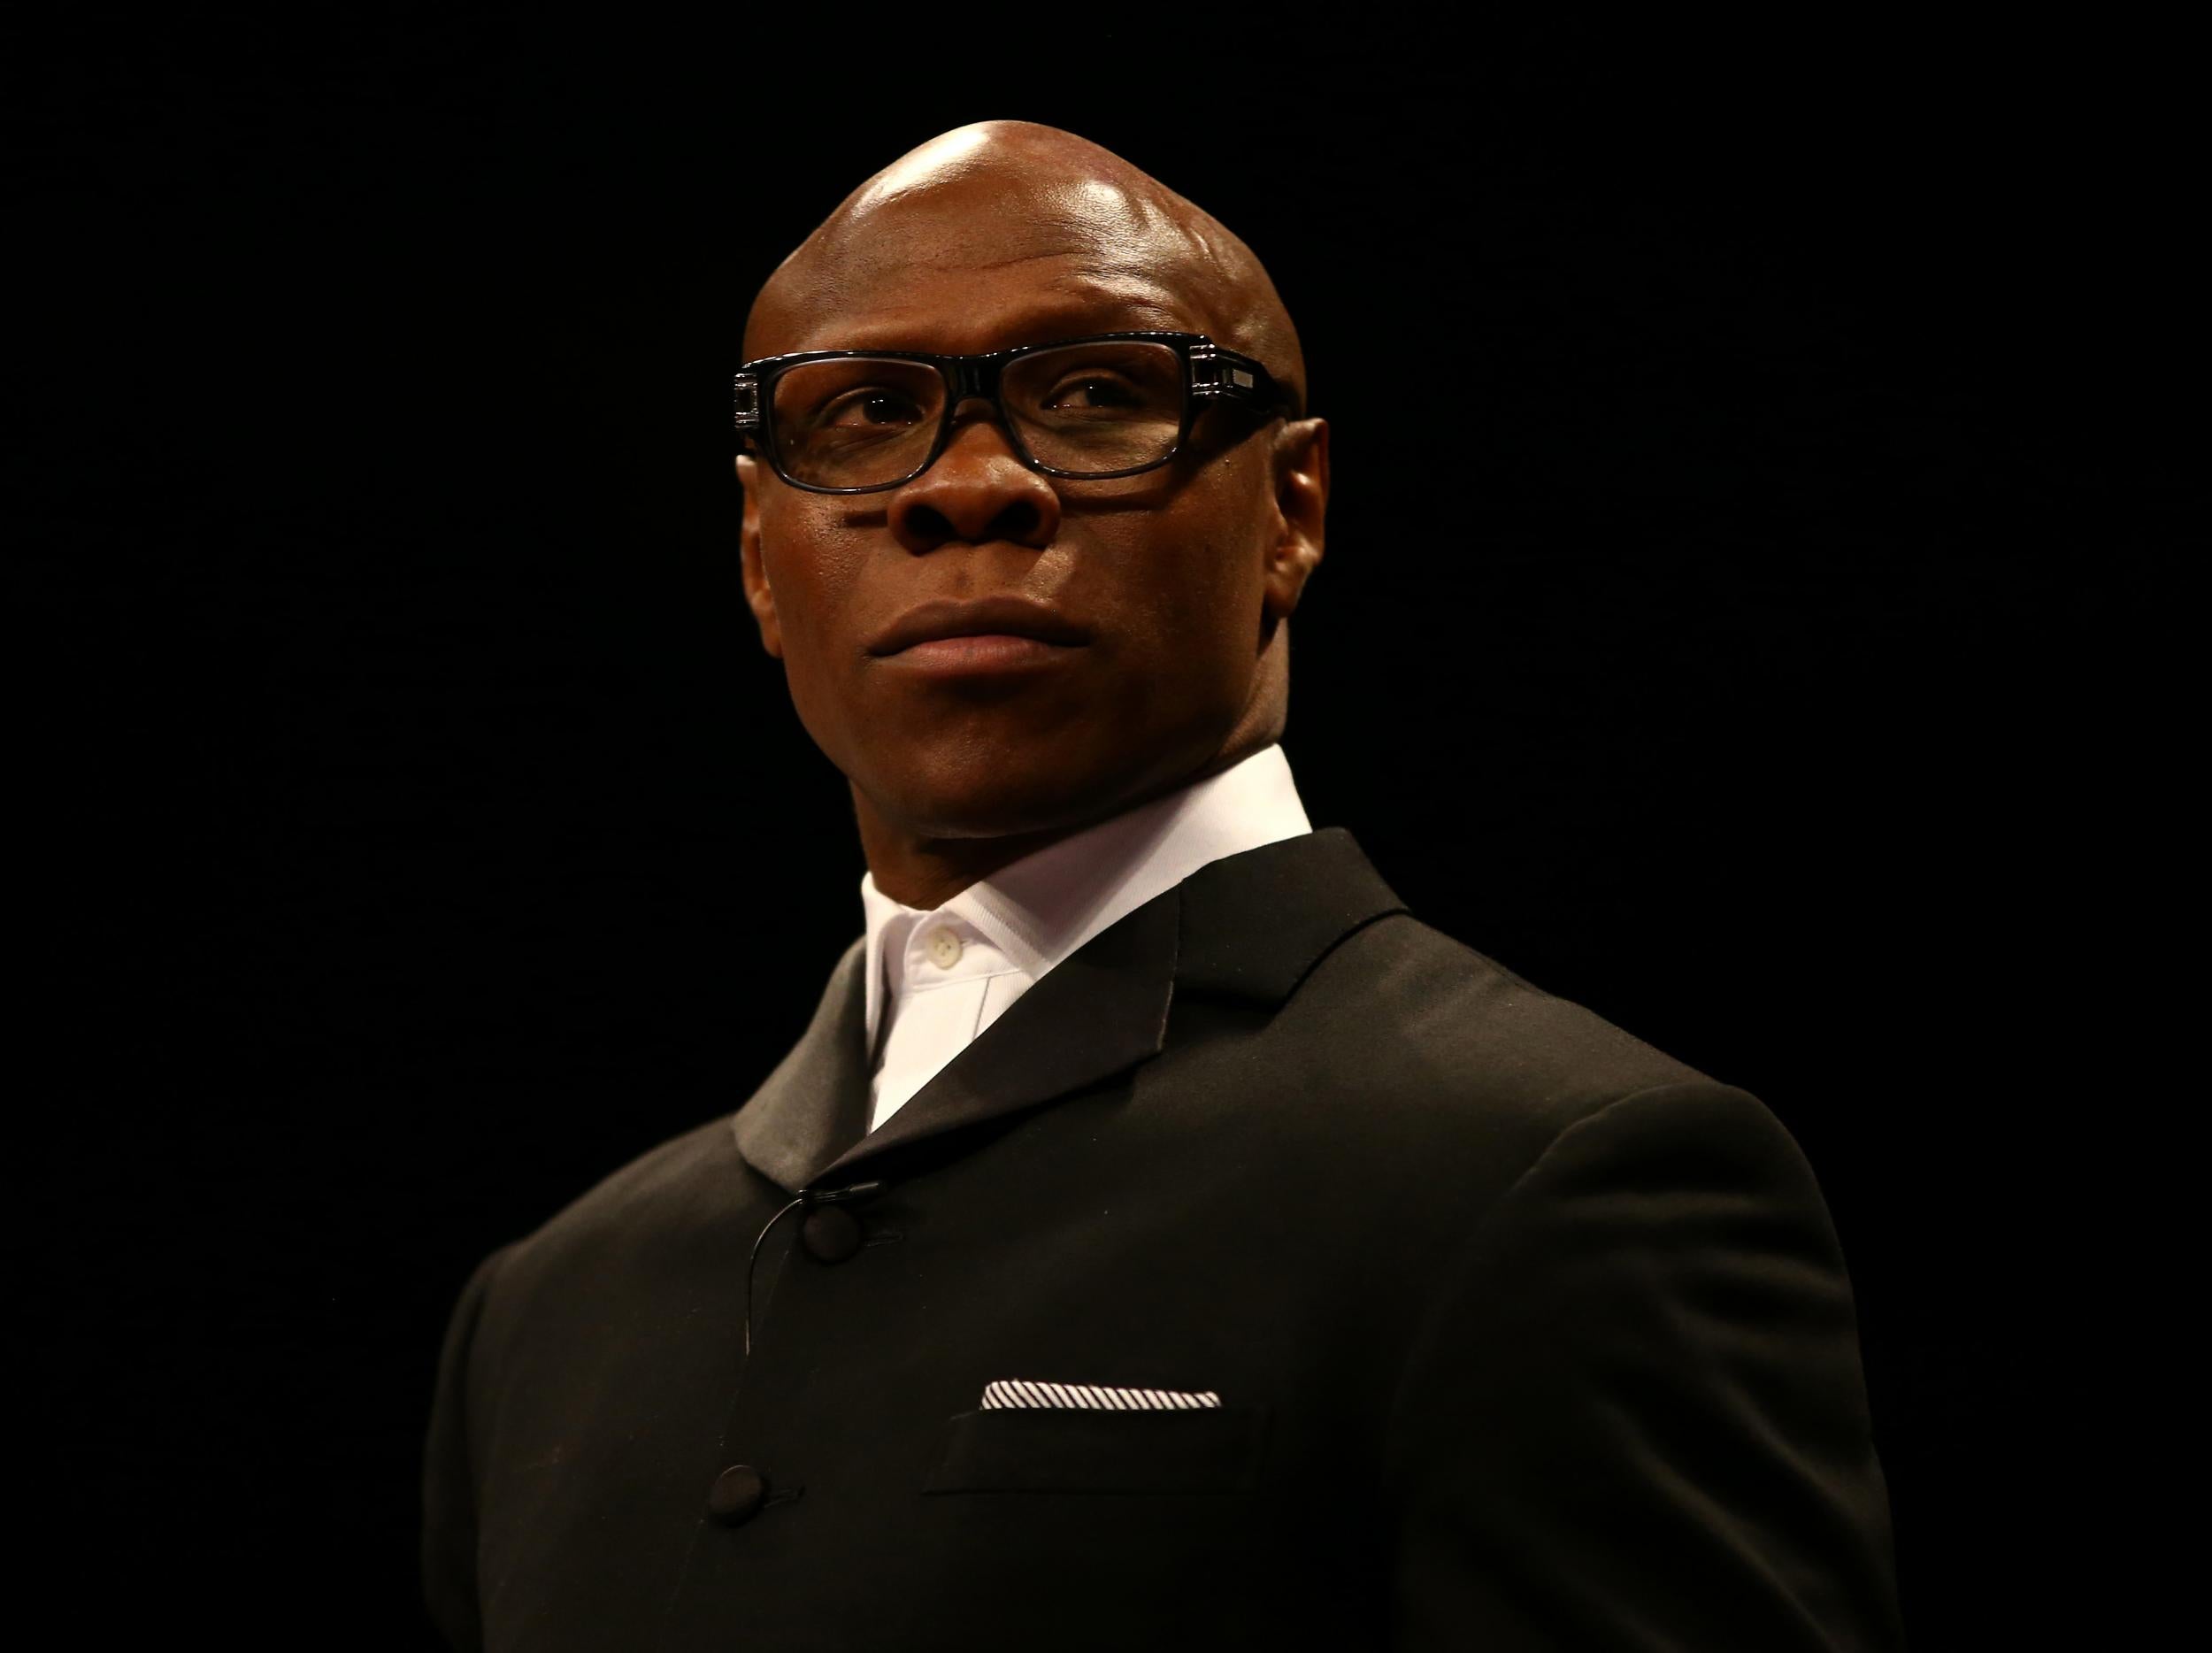 Eubank believes McGregor has what it takes to beat Mayweather